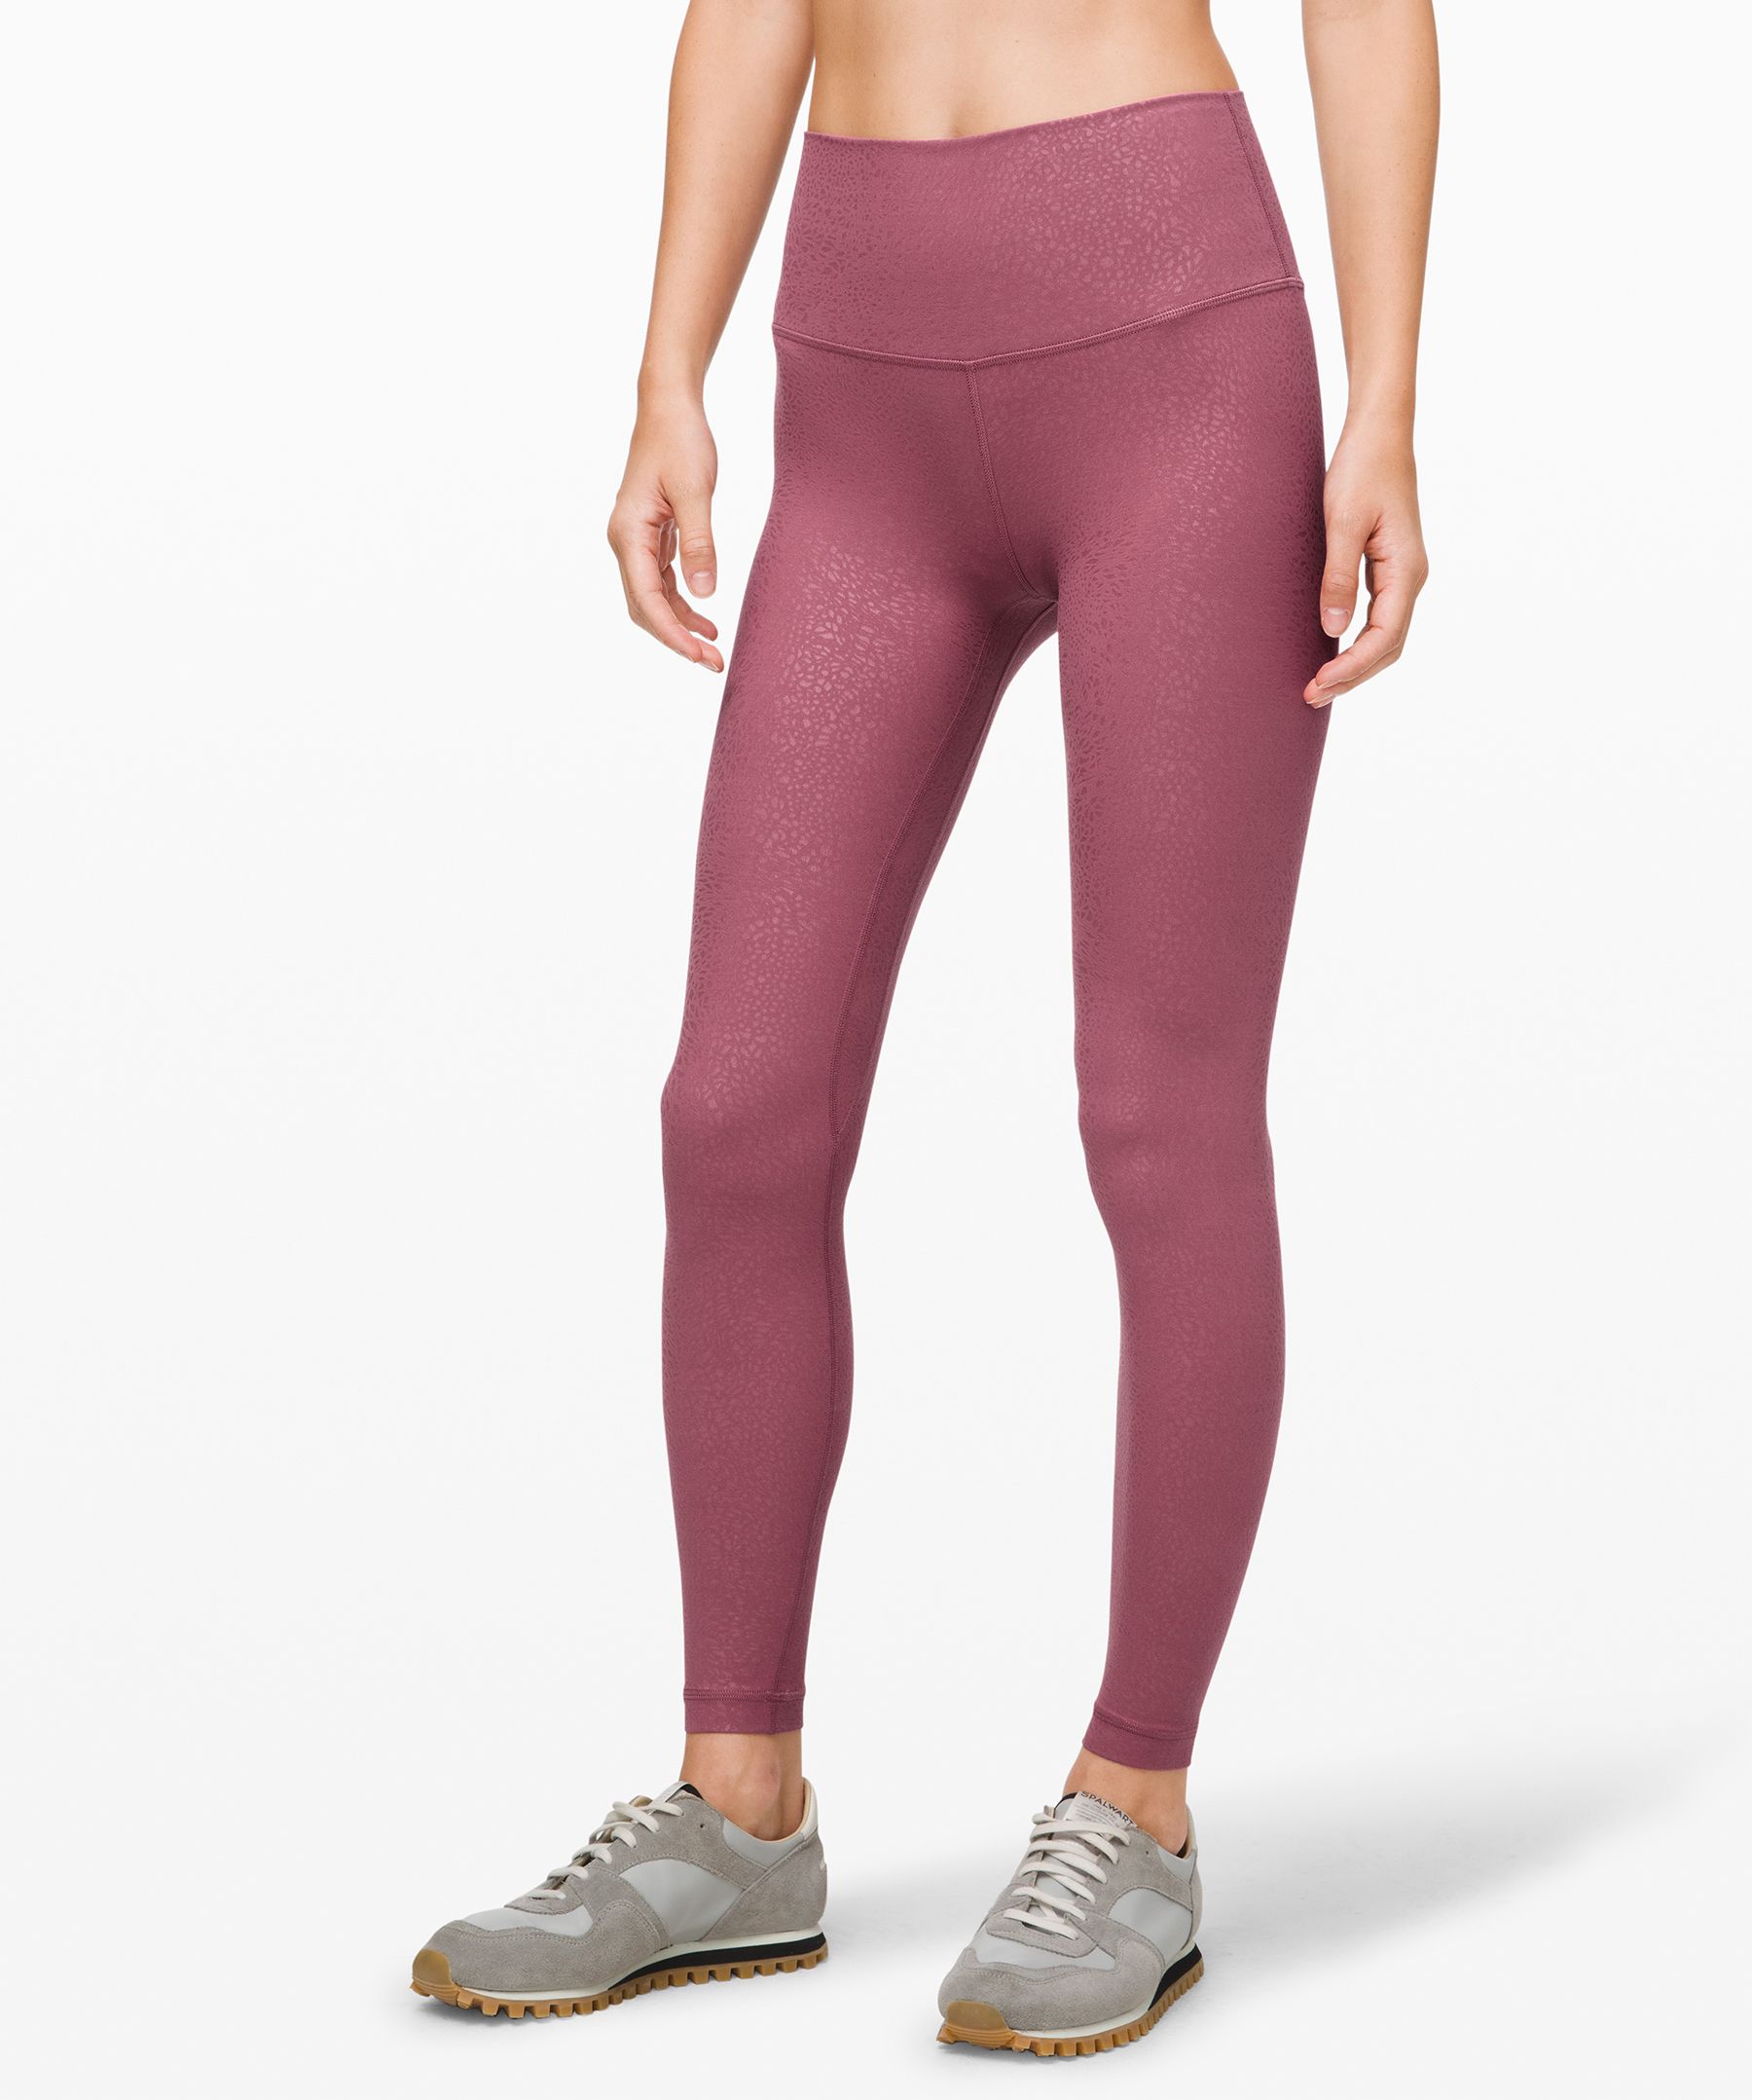 Lululemon Athletica Align Crop 21inch (Heritage 365 Camo Deep Coal, 8) at   Women's Clothing store